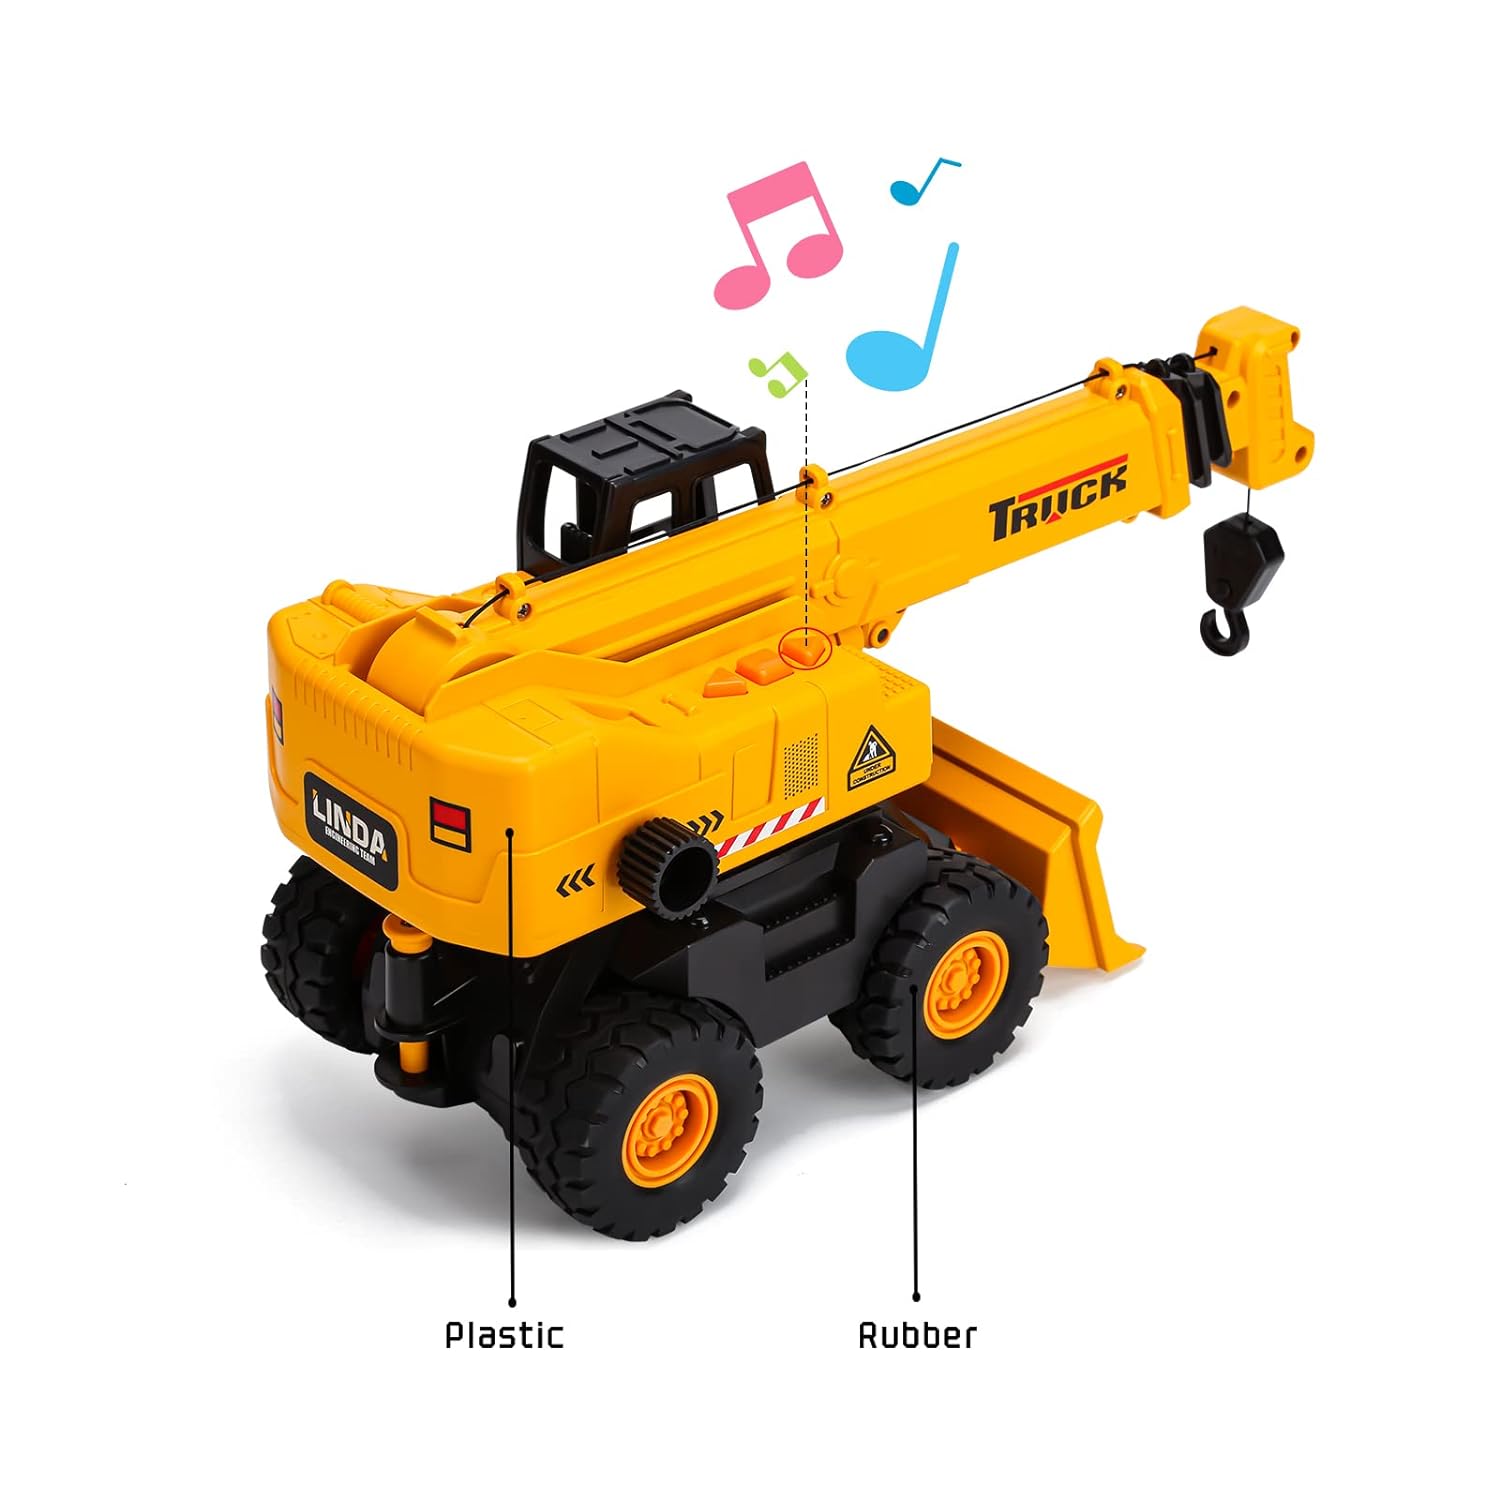 Construction Simulation Crane and Excavator Toy for Kids Toy Vehicles Building Toy Set with Lights and Sounds